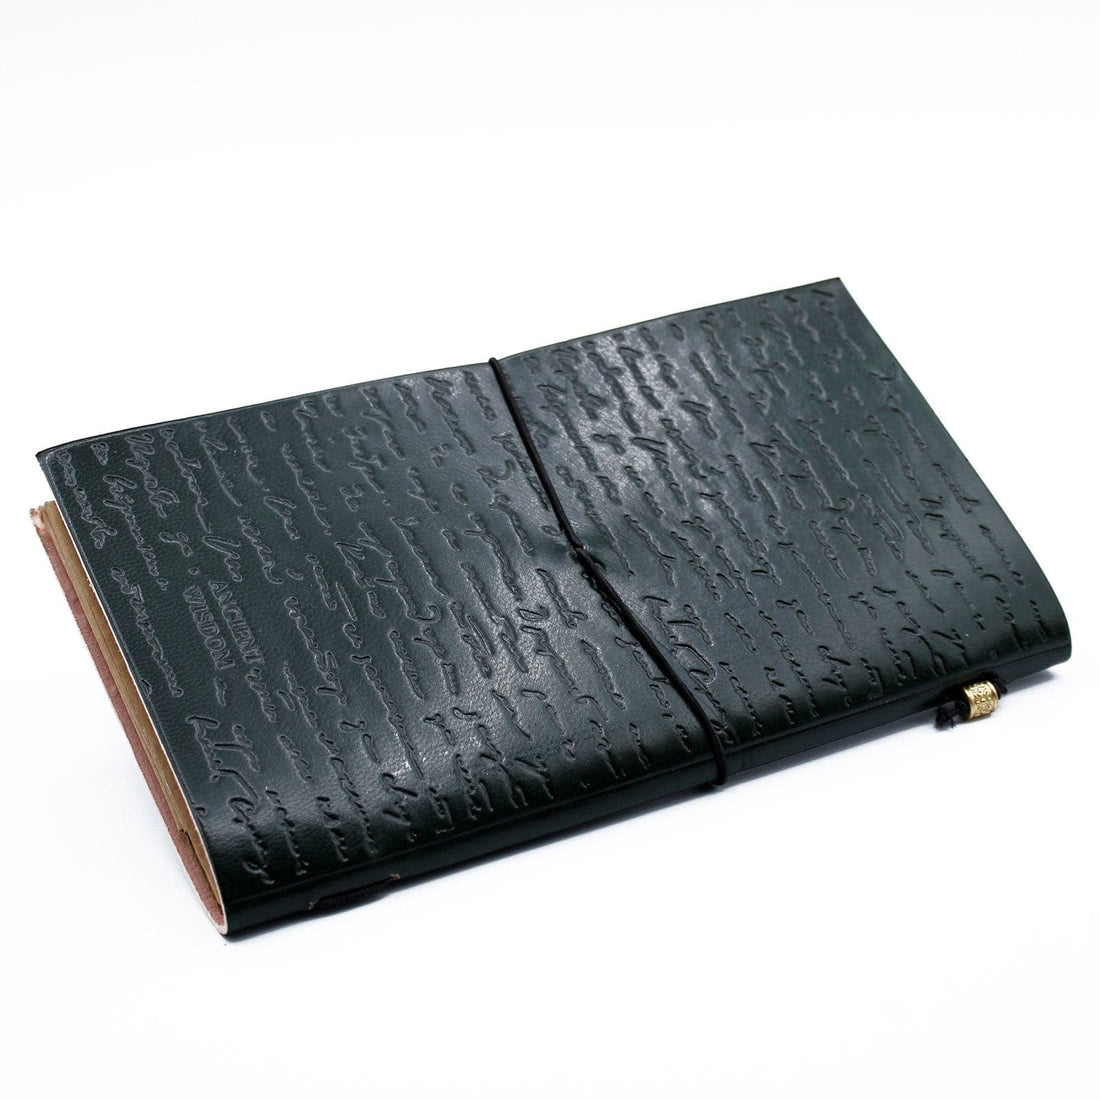 Handmade Leather Journal - If a Story is in You - Green (80 pages) - best price from Maltashopper.com MSJ-04